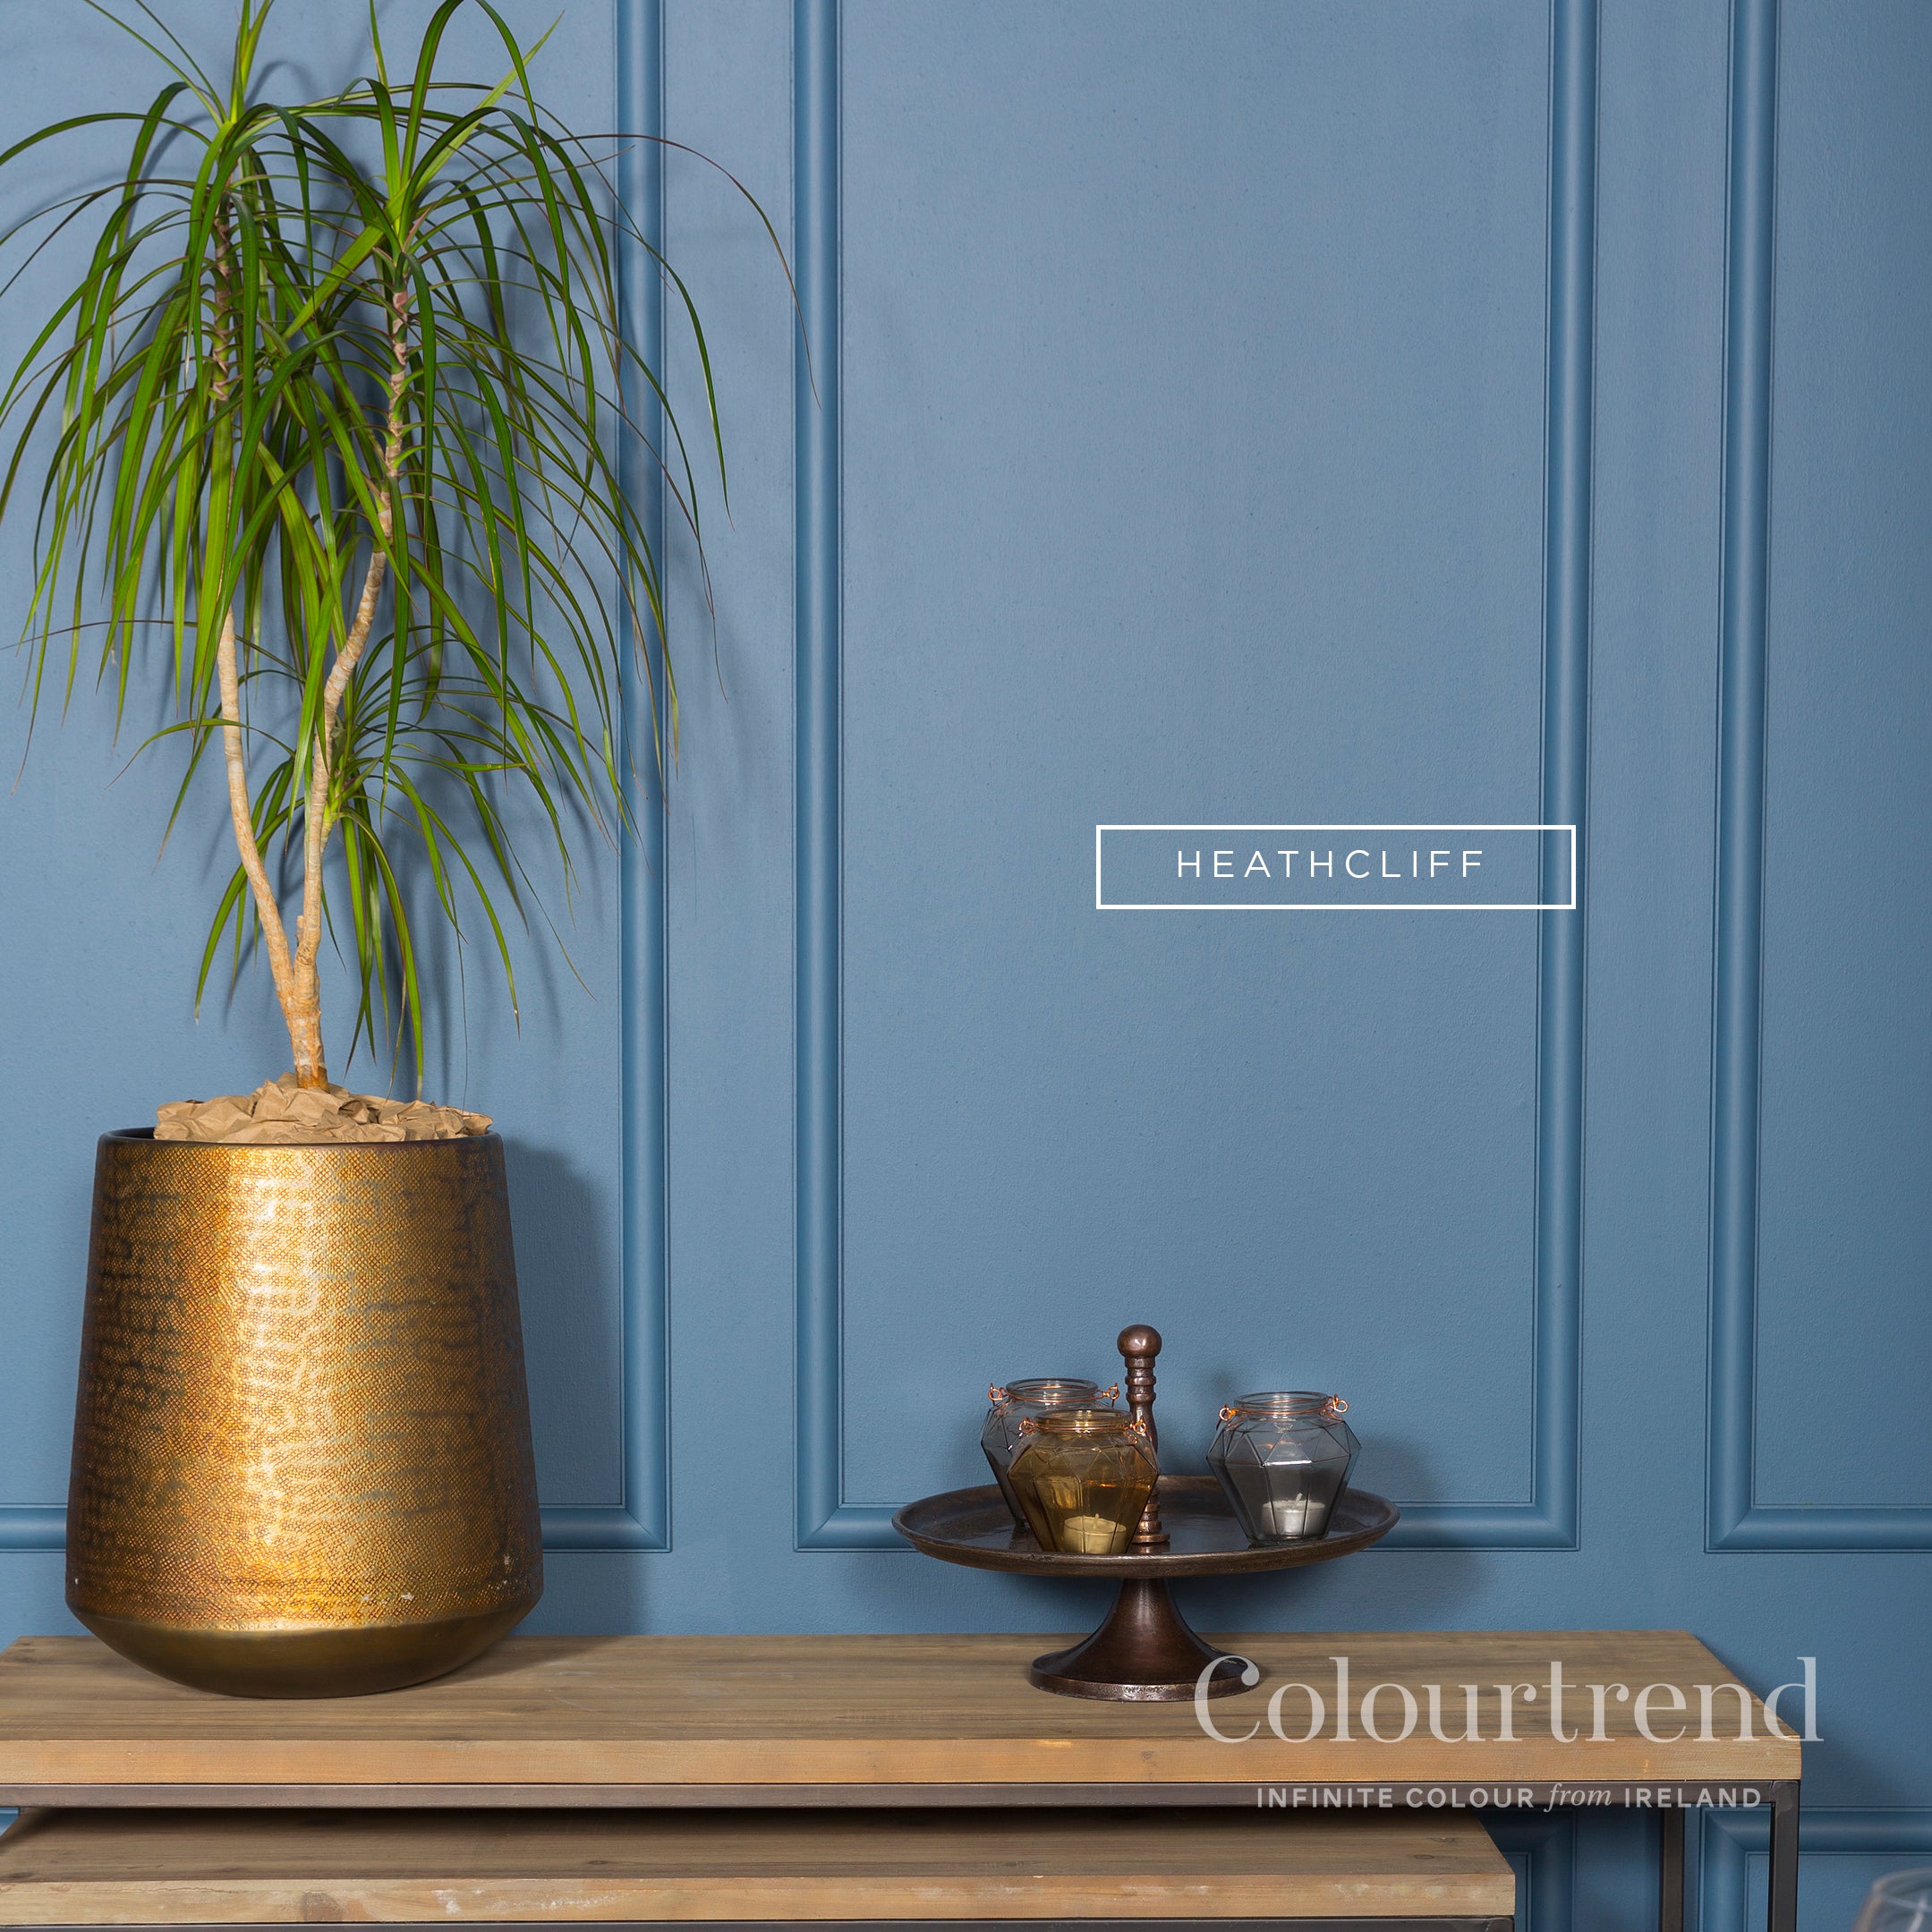 Colourtrend Heathcliff | Same Day Dublin and Nationwide Paint in Ireland Delivery by Weirs of Baggot Street - Official Colourtrend Stockist